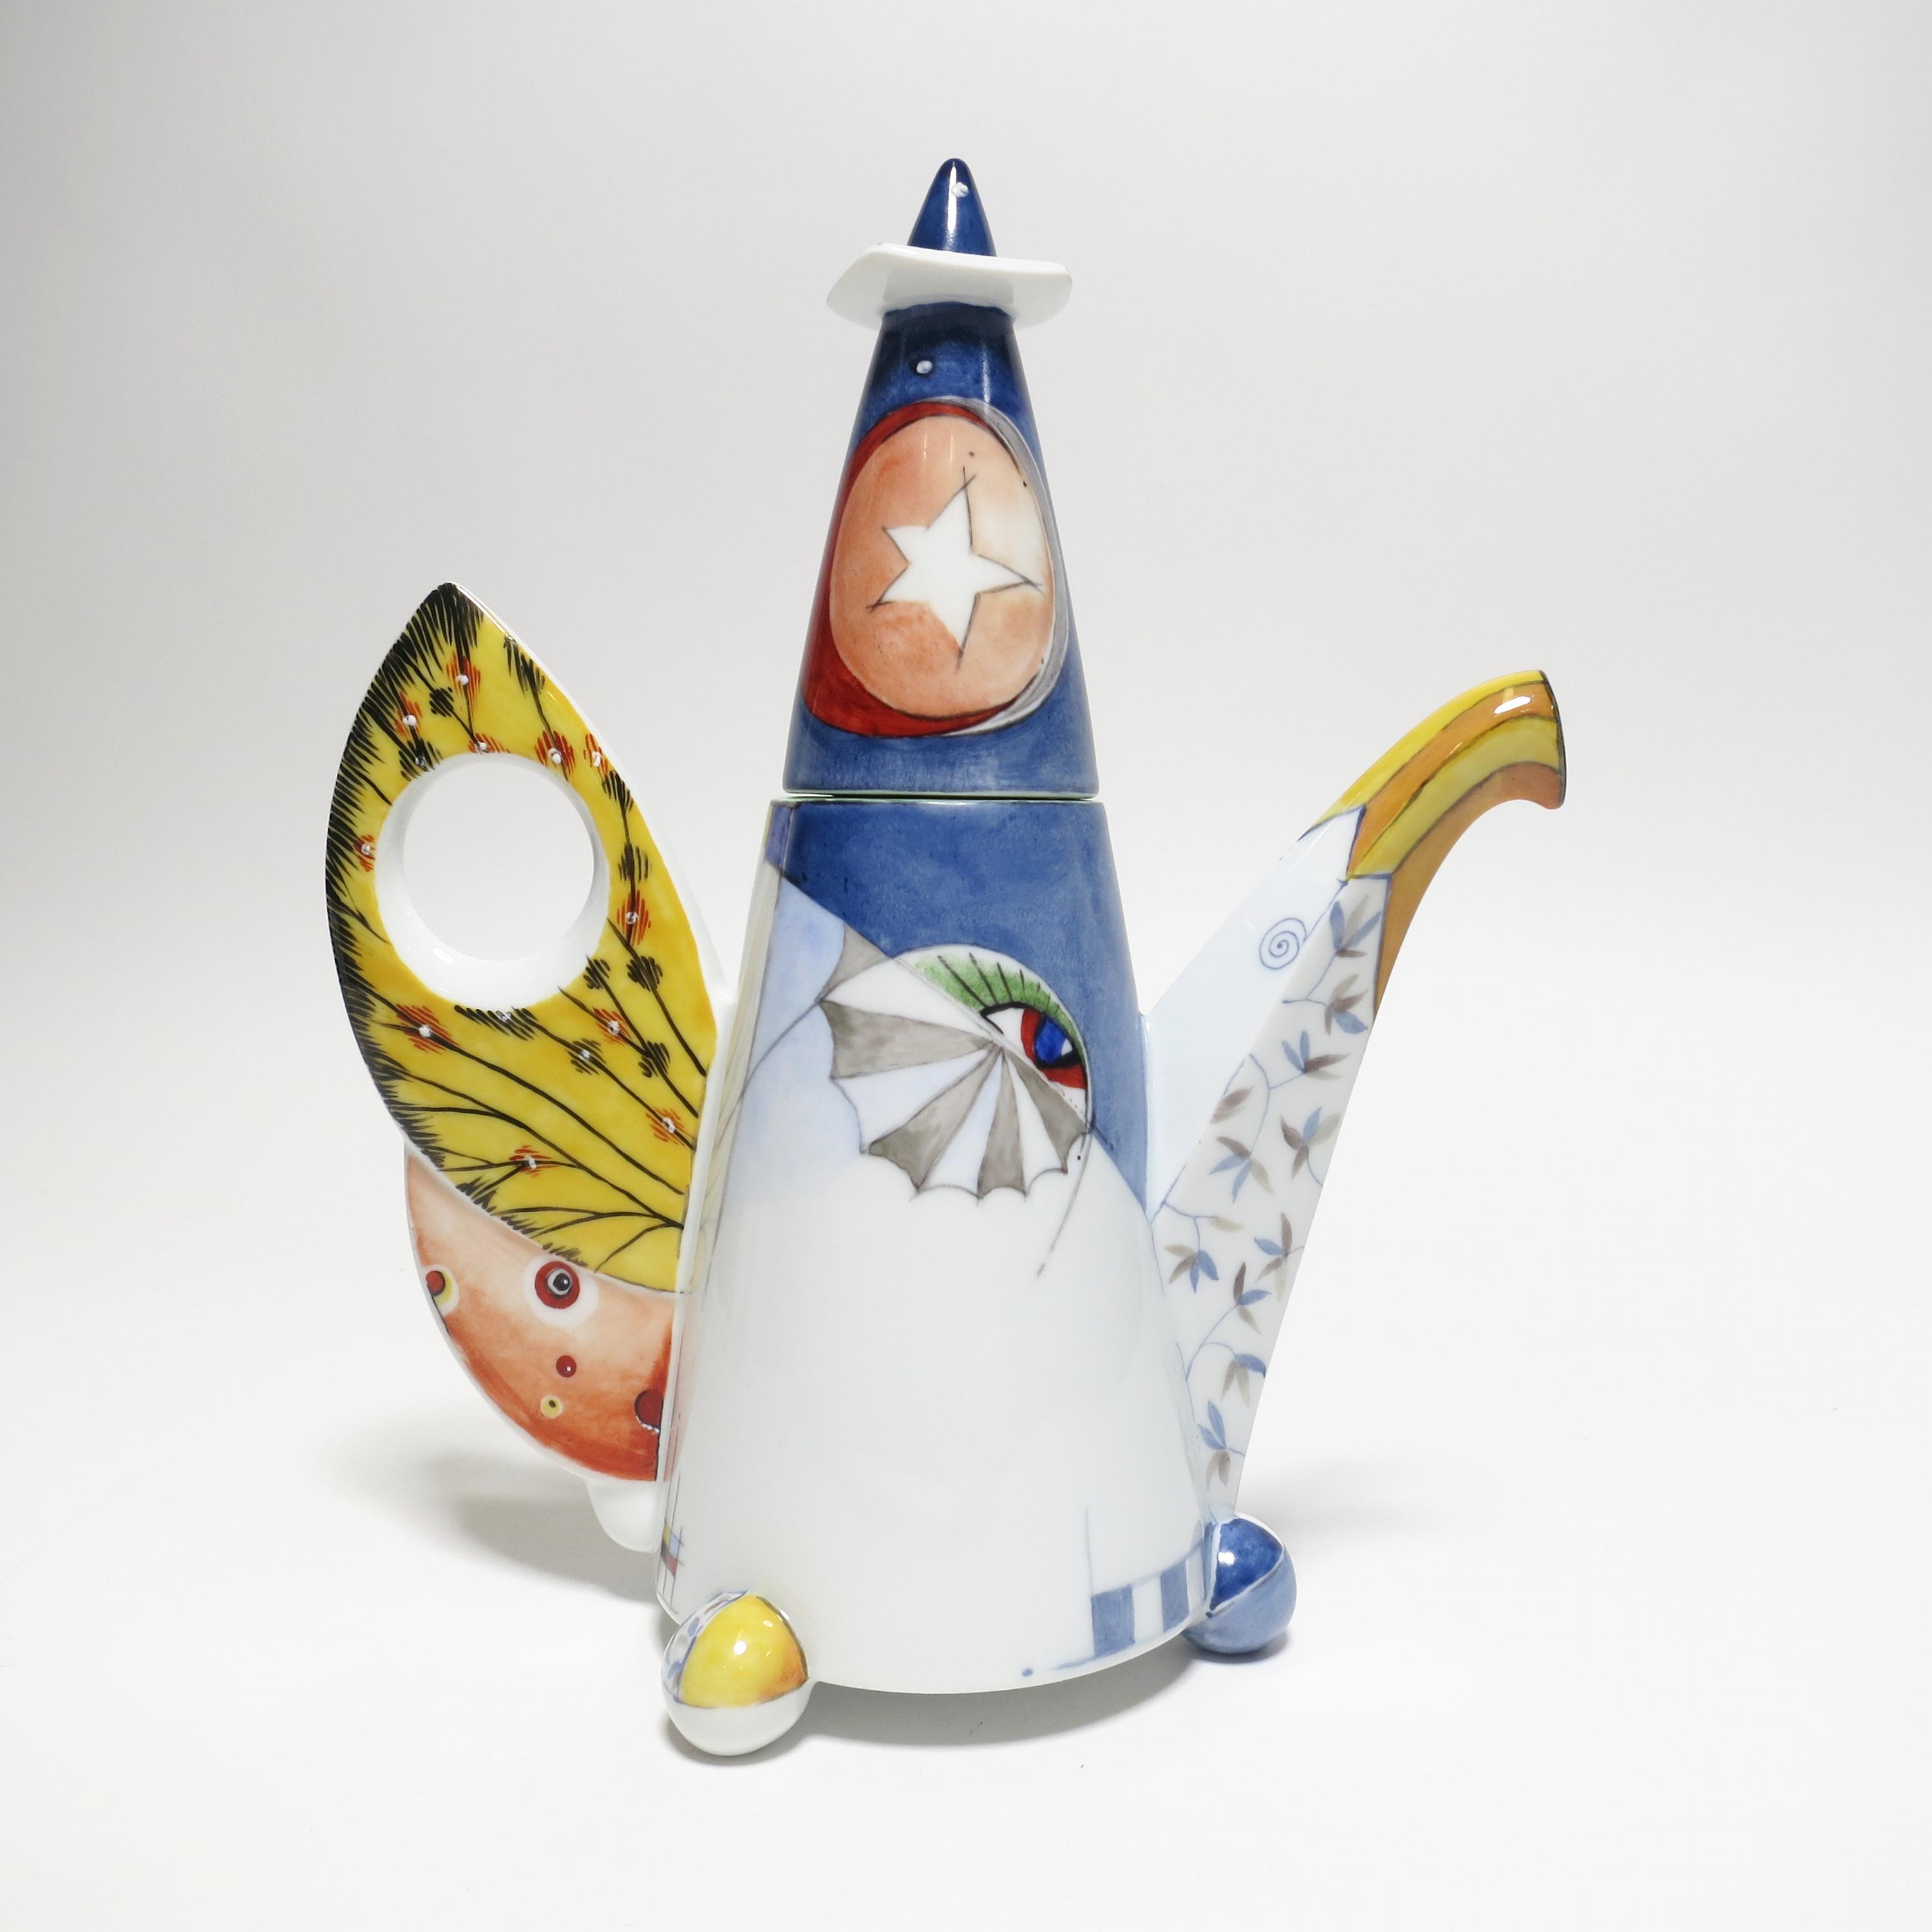 SMALL PORCELAIN JUG, TWO CUPS AND TWO PLATES 'ABRAKADABRA'. Meissen. Maker/Designer: Model S. Wachs, - Image 2 of 5